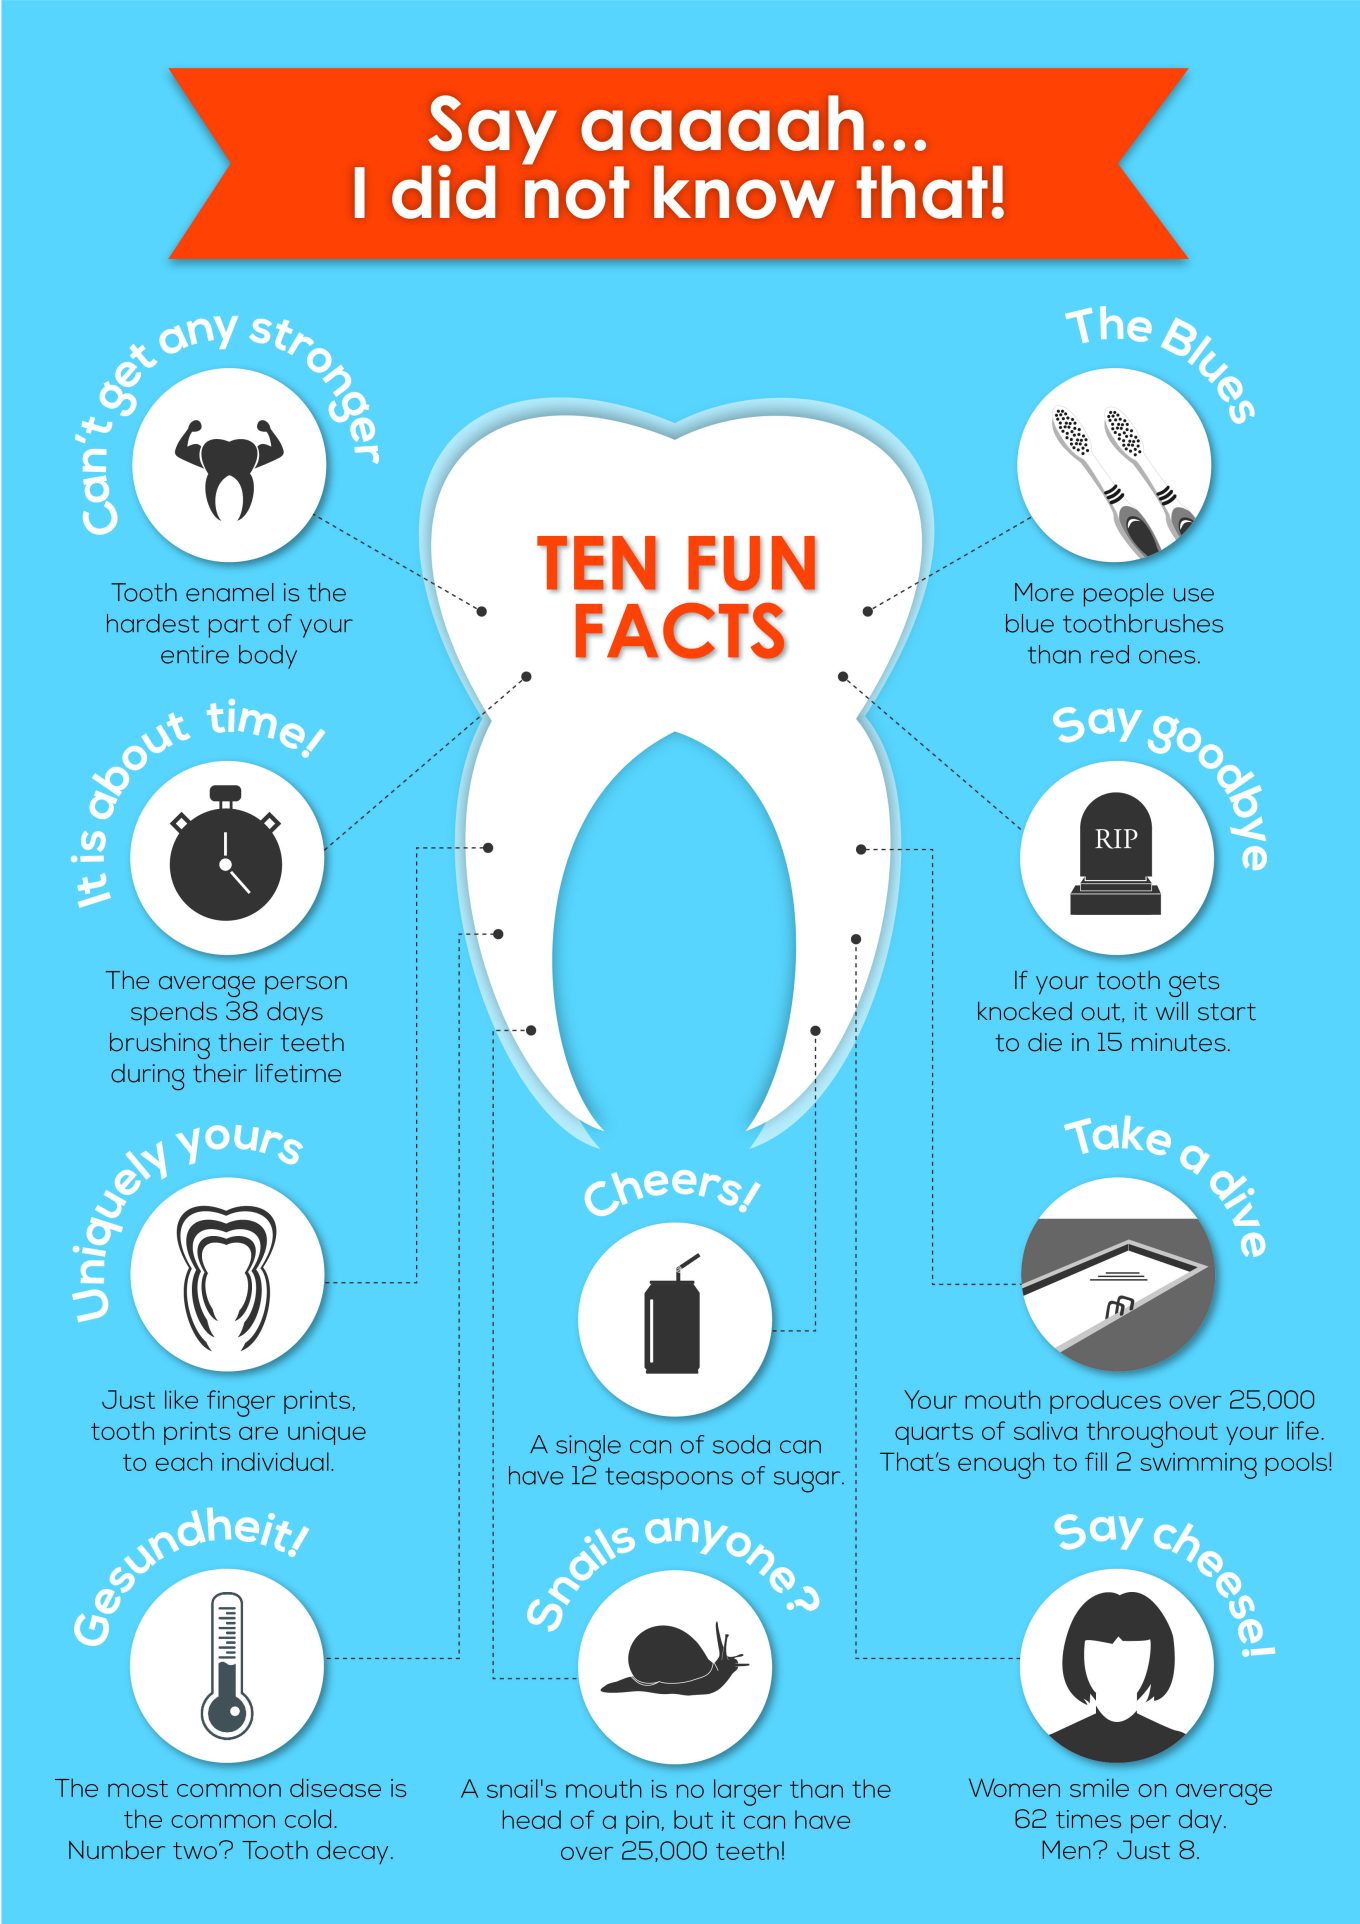 10 Cool Facts About Your Mouth